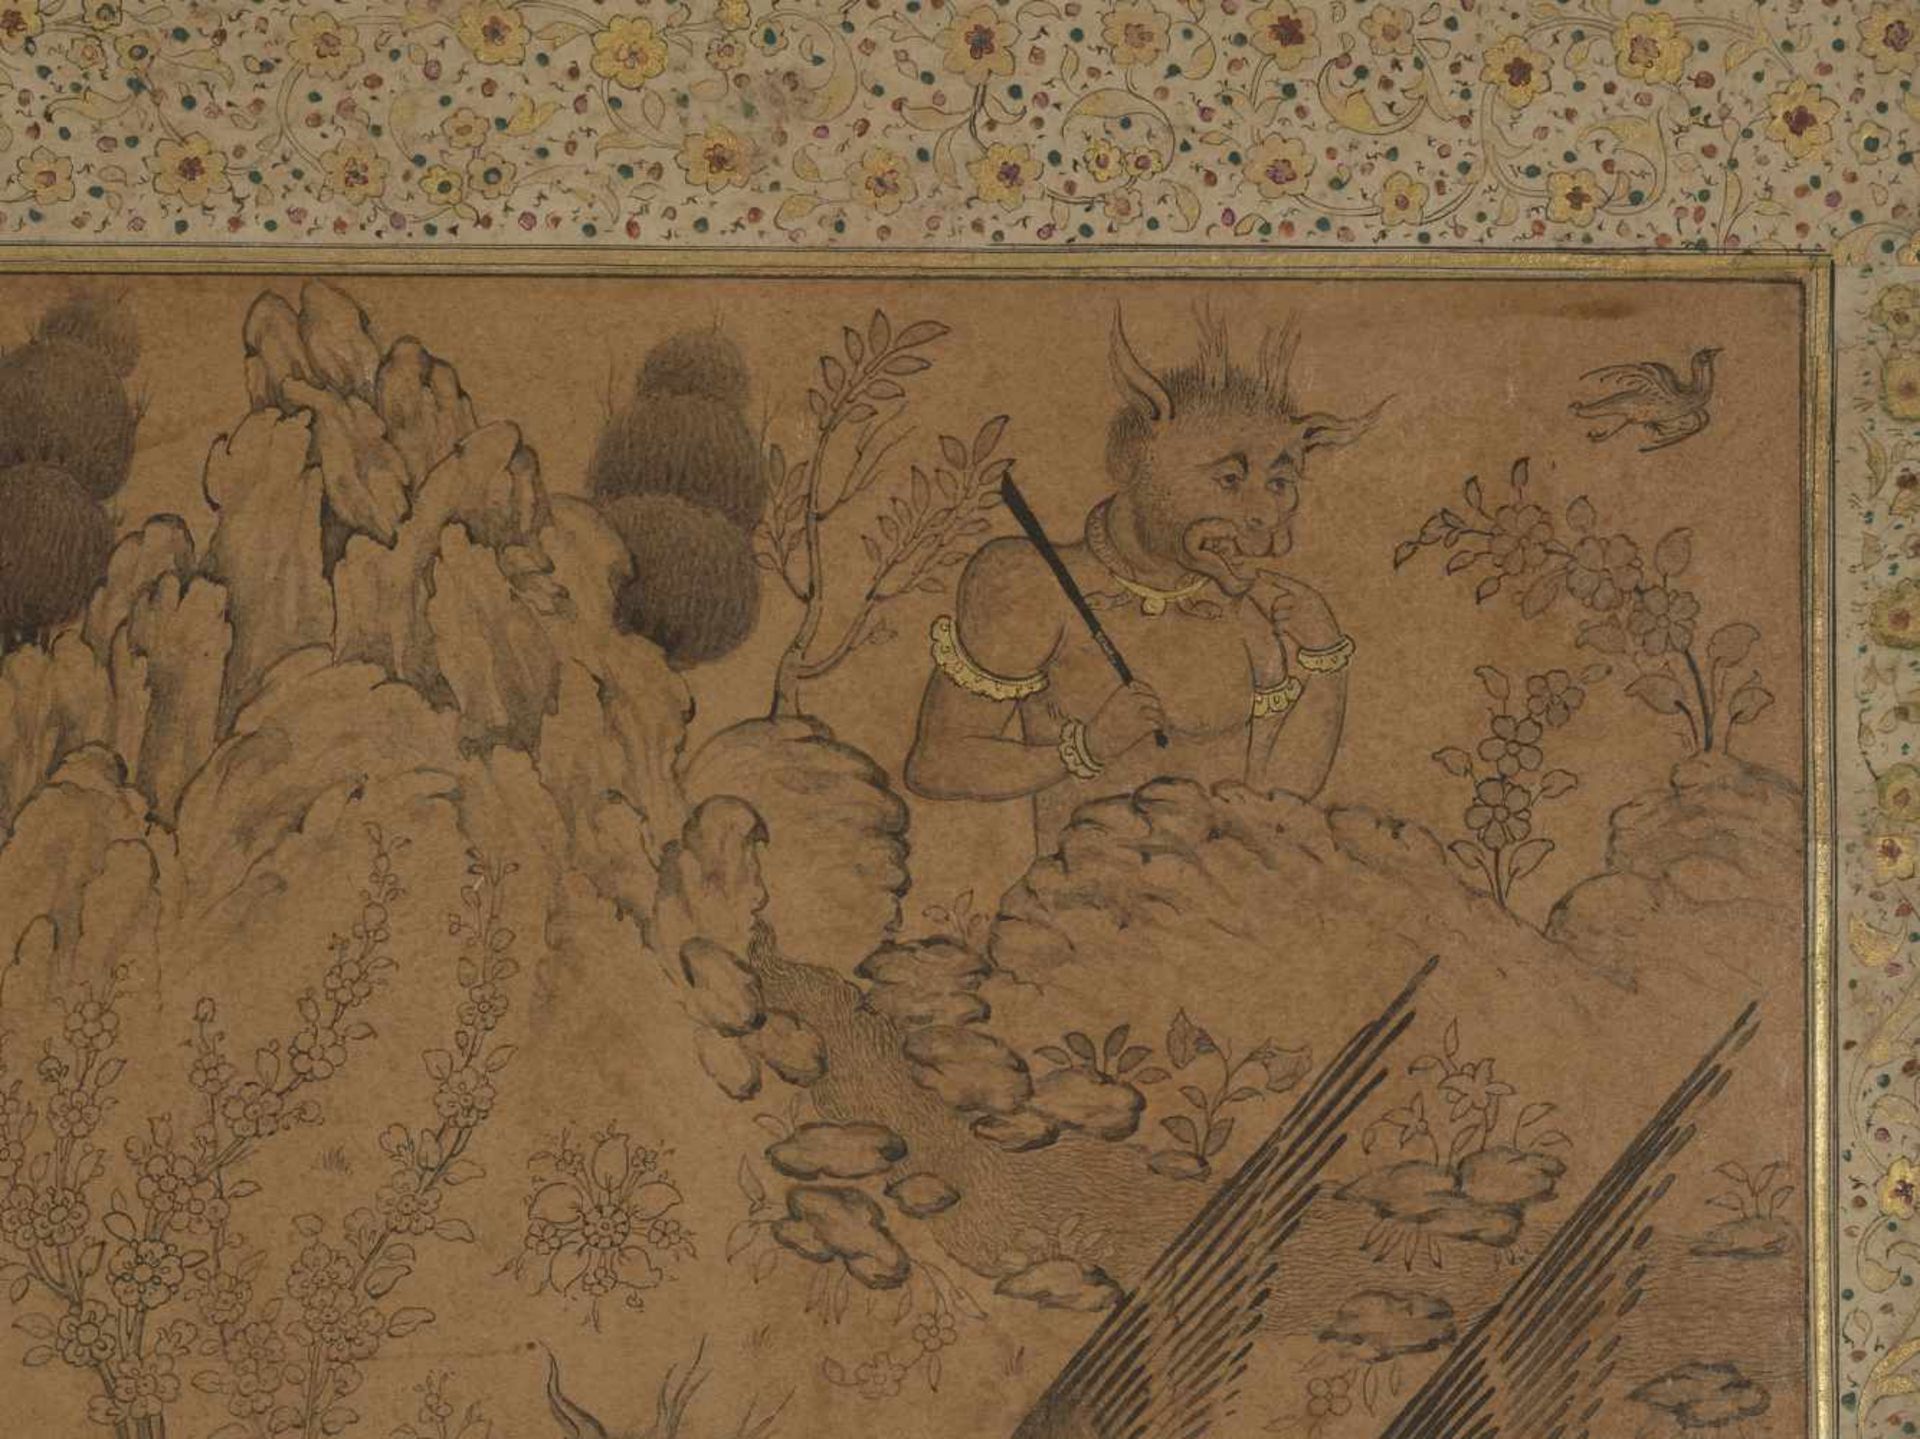 AN OTTOMAN DRAWING OF A PERI WITH SHURALE Ink and gold on very thin paper, laid down on cardboard, - Image 4 of 6